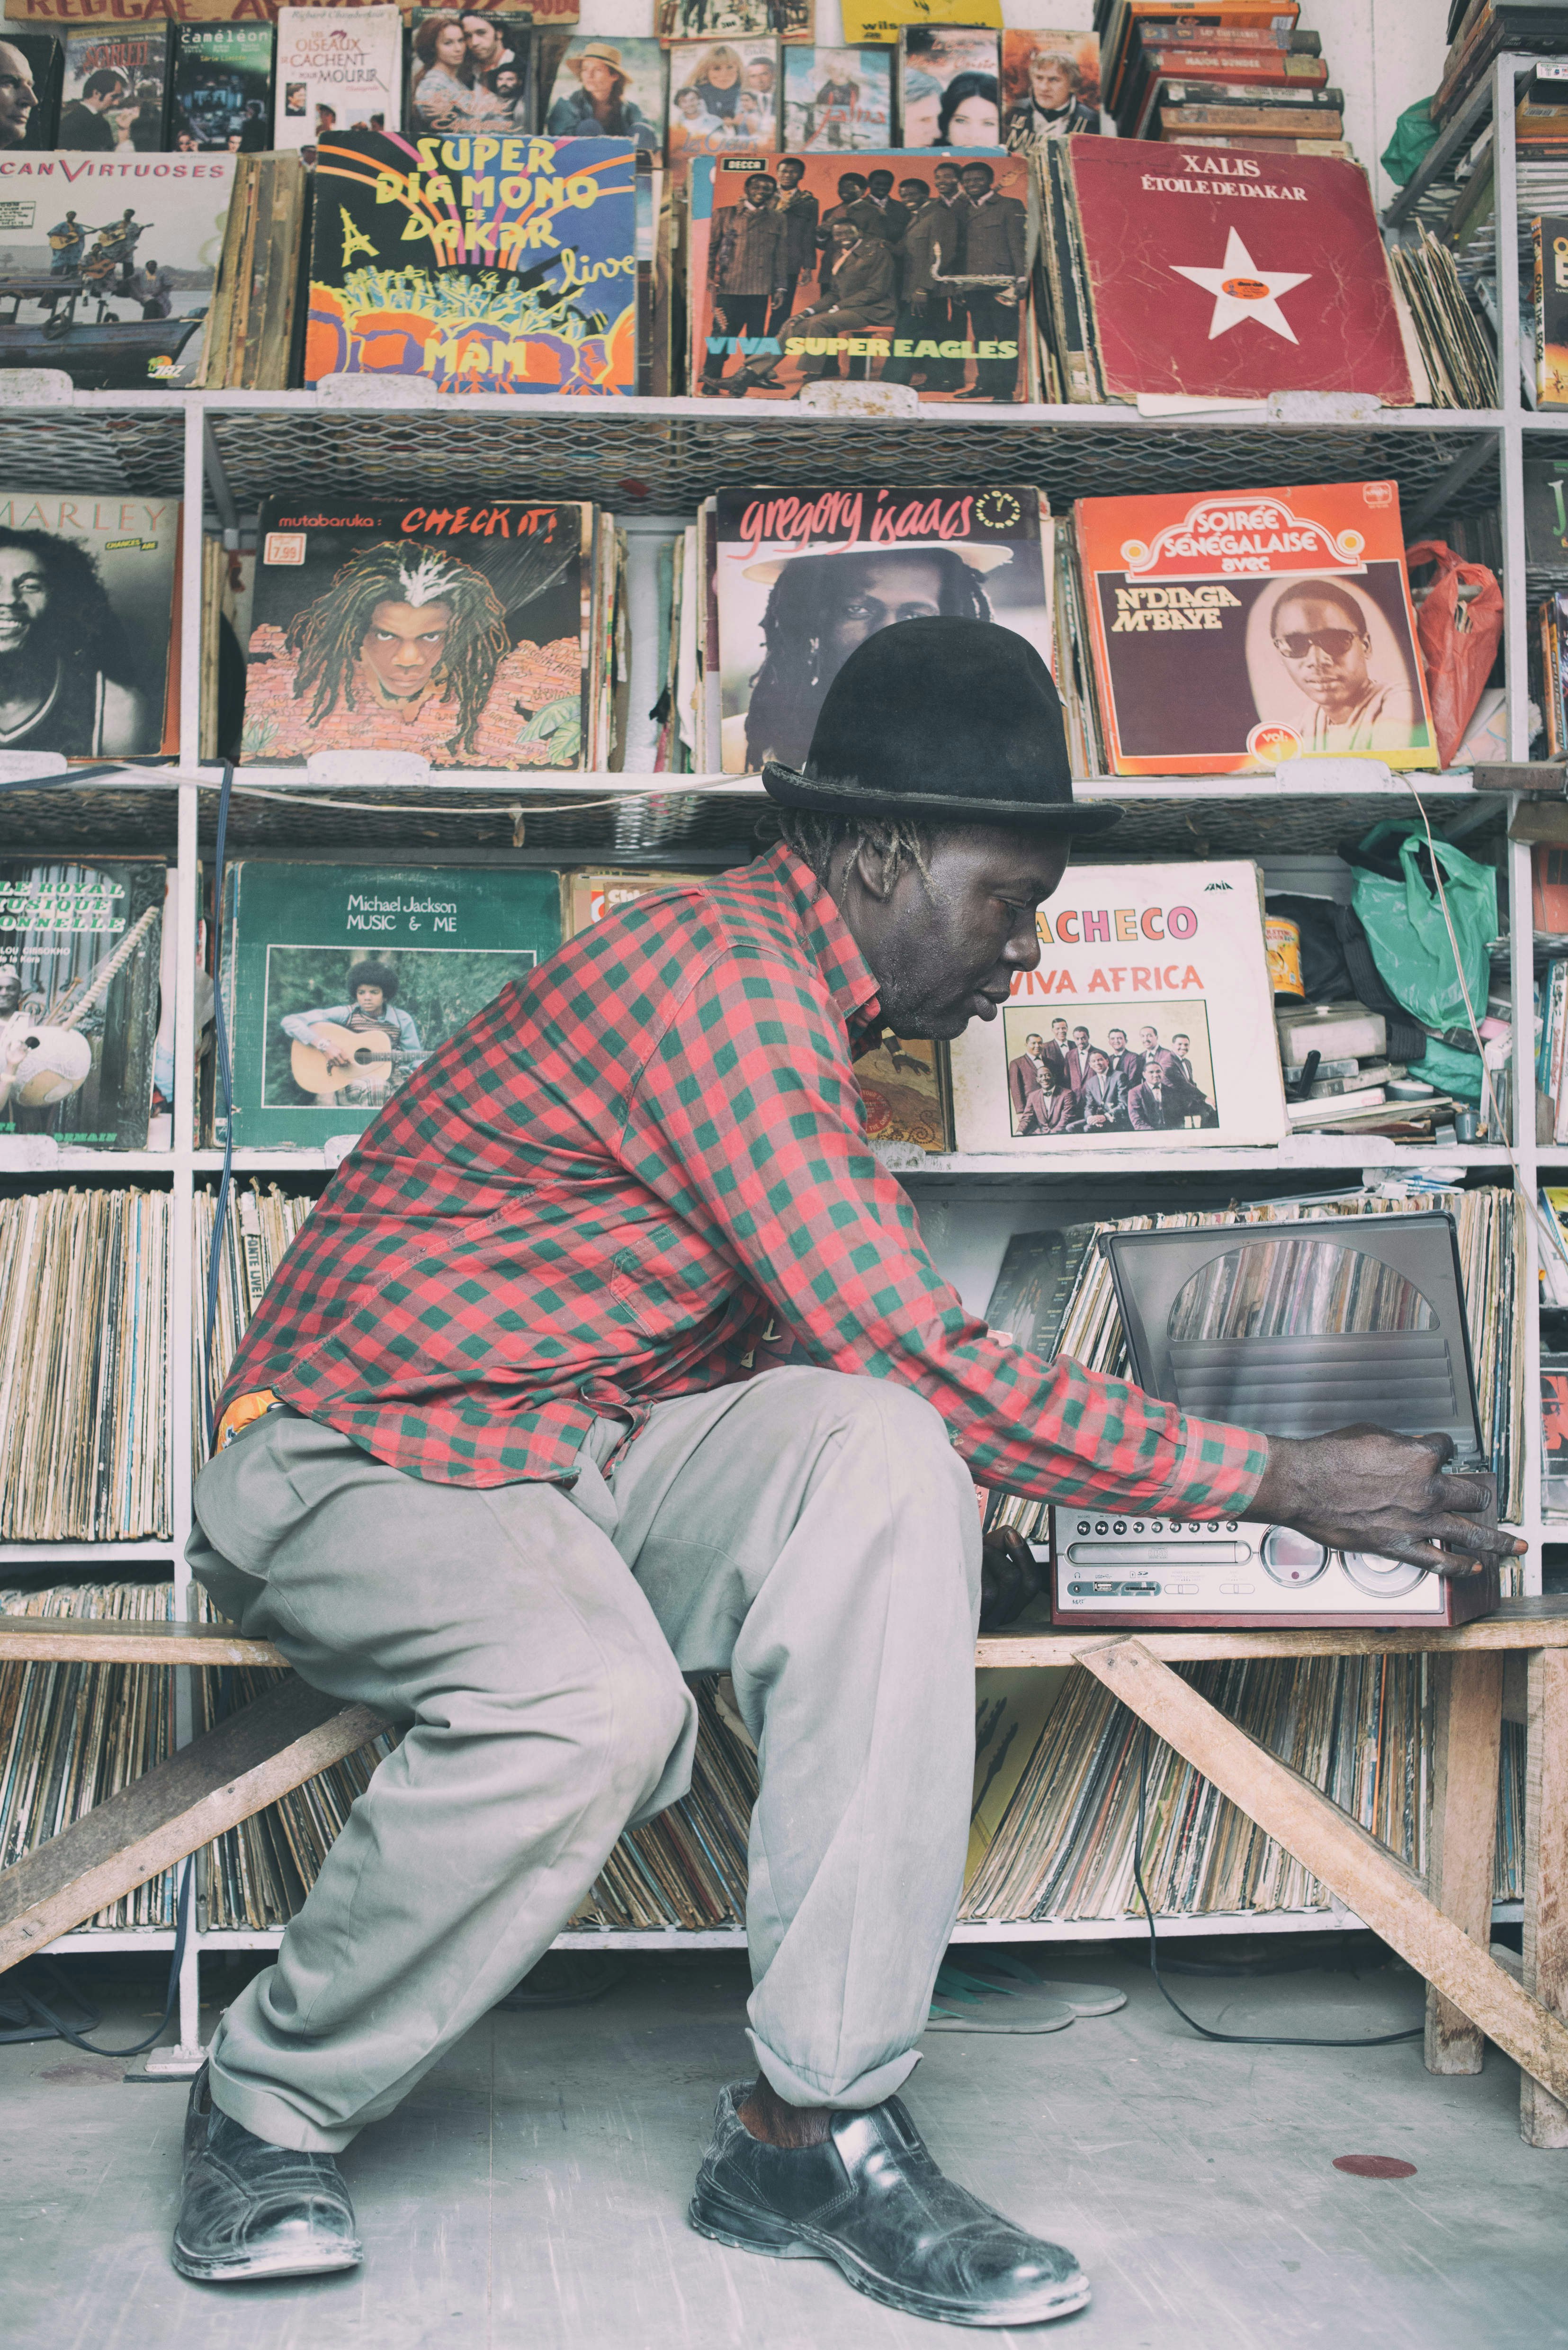 Dread Amala leans over his record player, adjusting the contols; behind him are shelves upon shelves of classic albums.